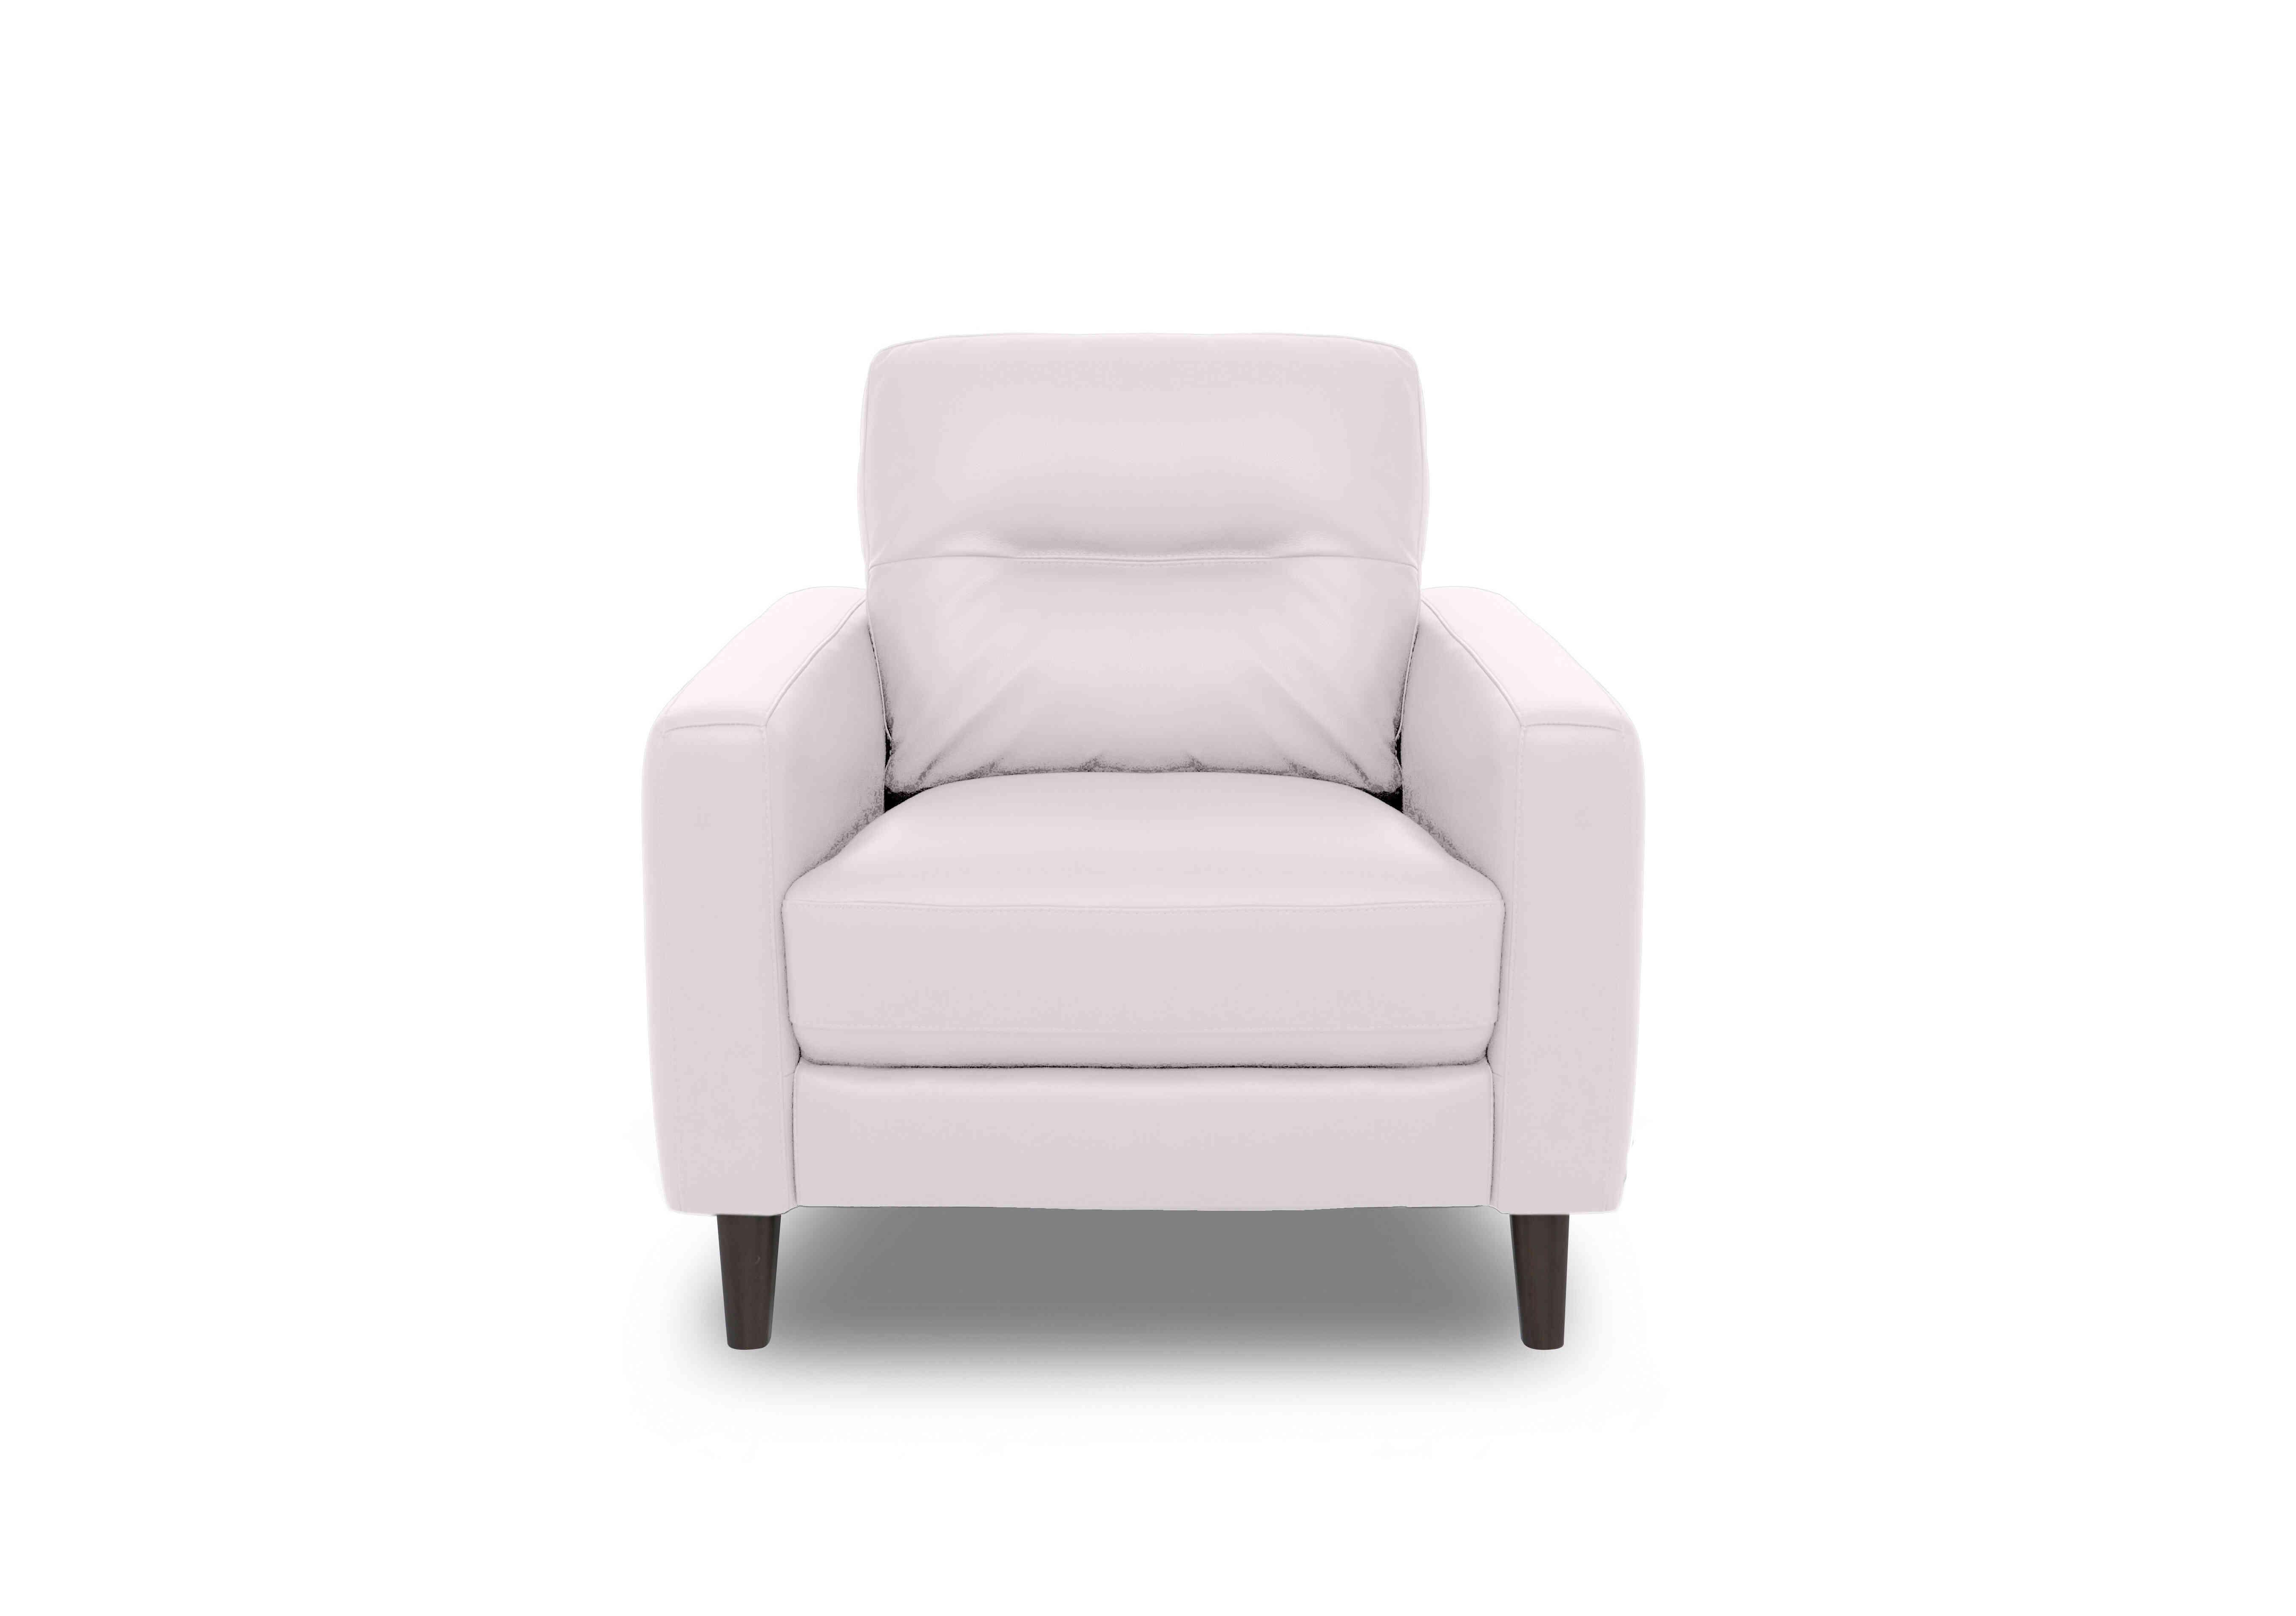 Jules Leather Chair in Bv-744d Star White on Furniture Village